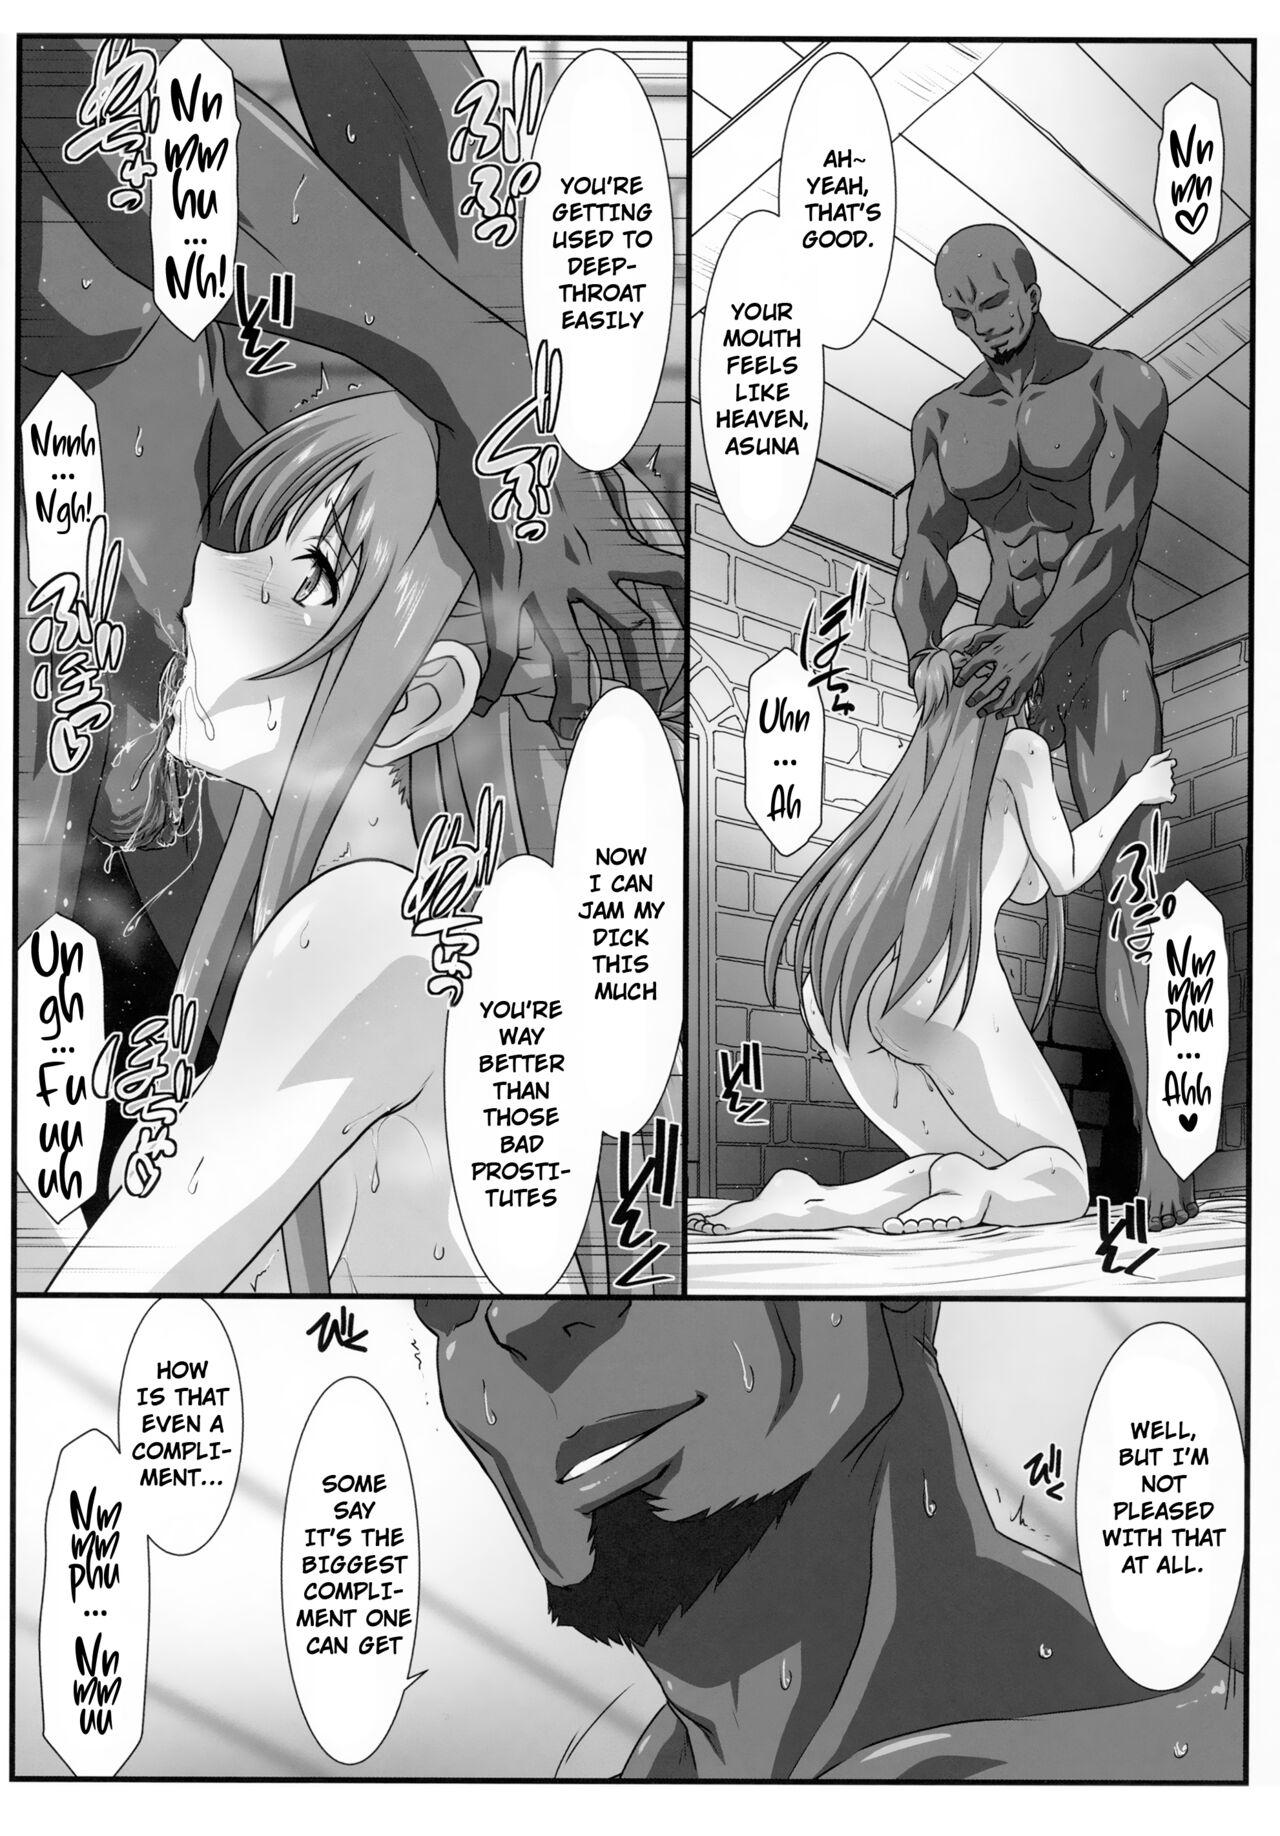 Pigtails Astral Bout Ver. 46 - Sword art online Amatuer - Page 9